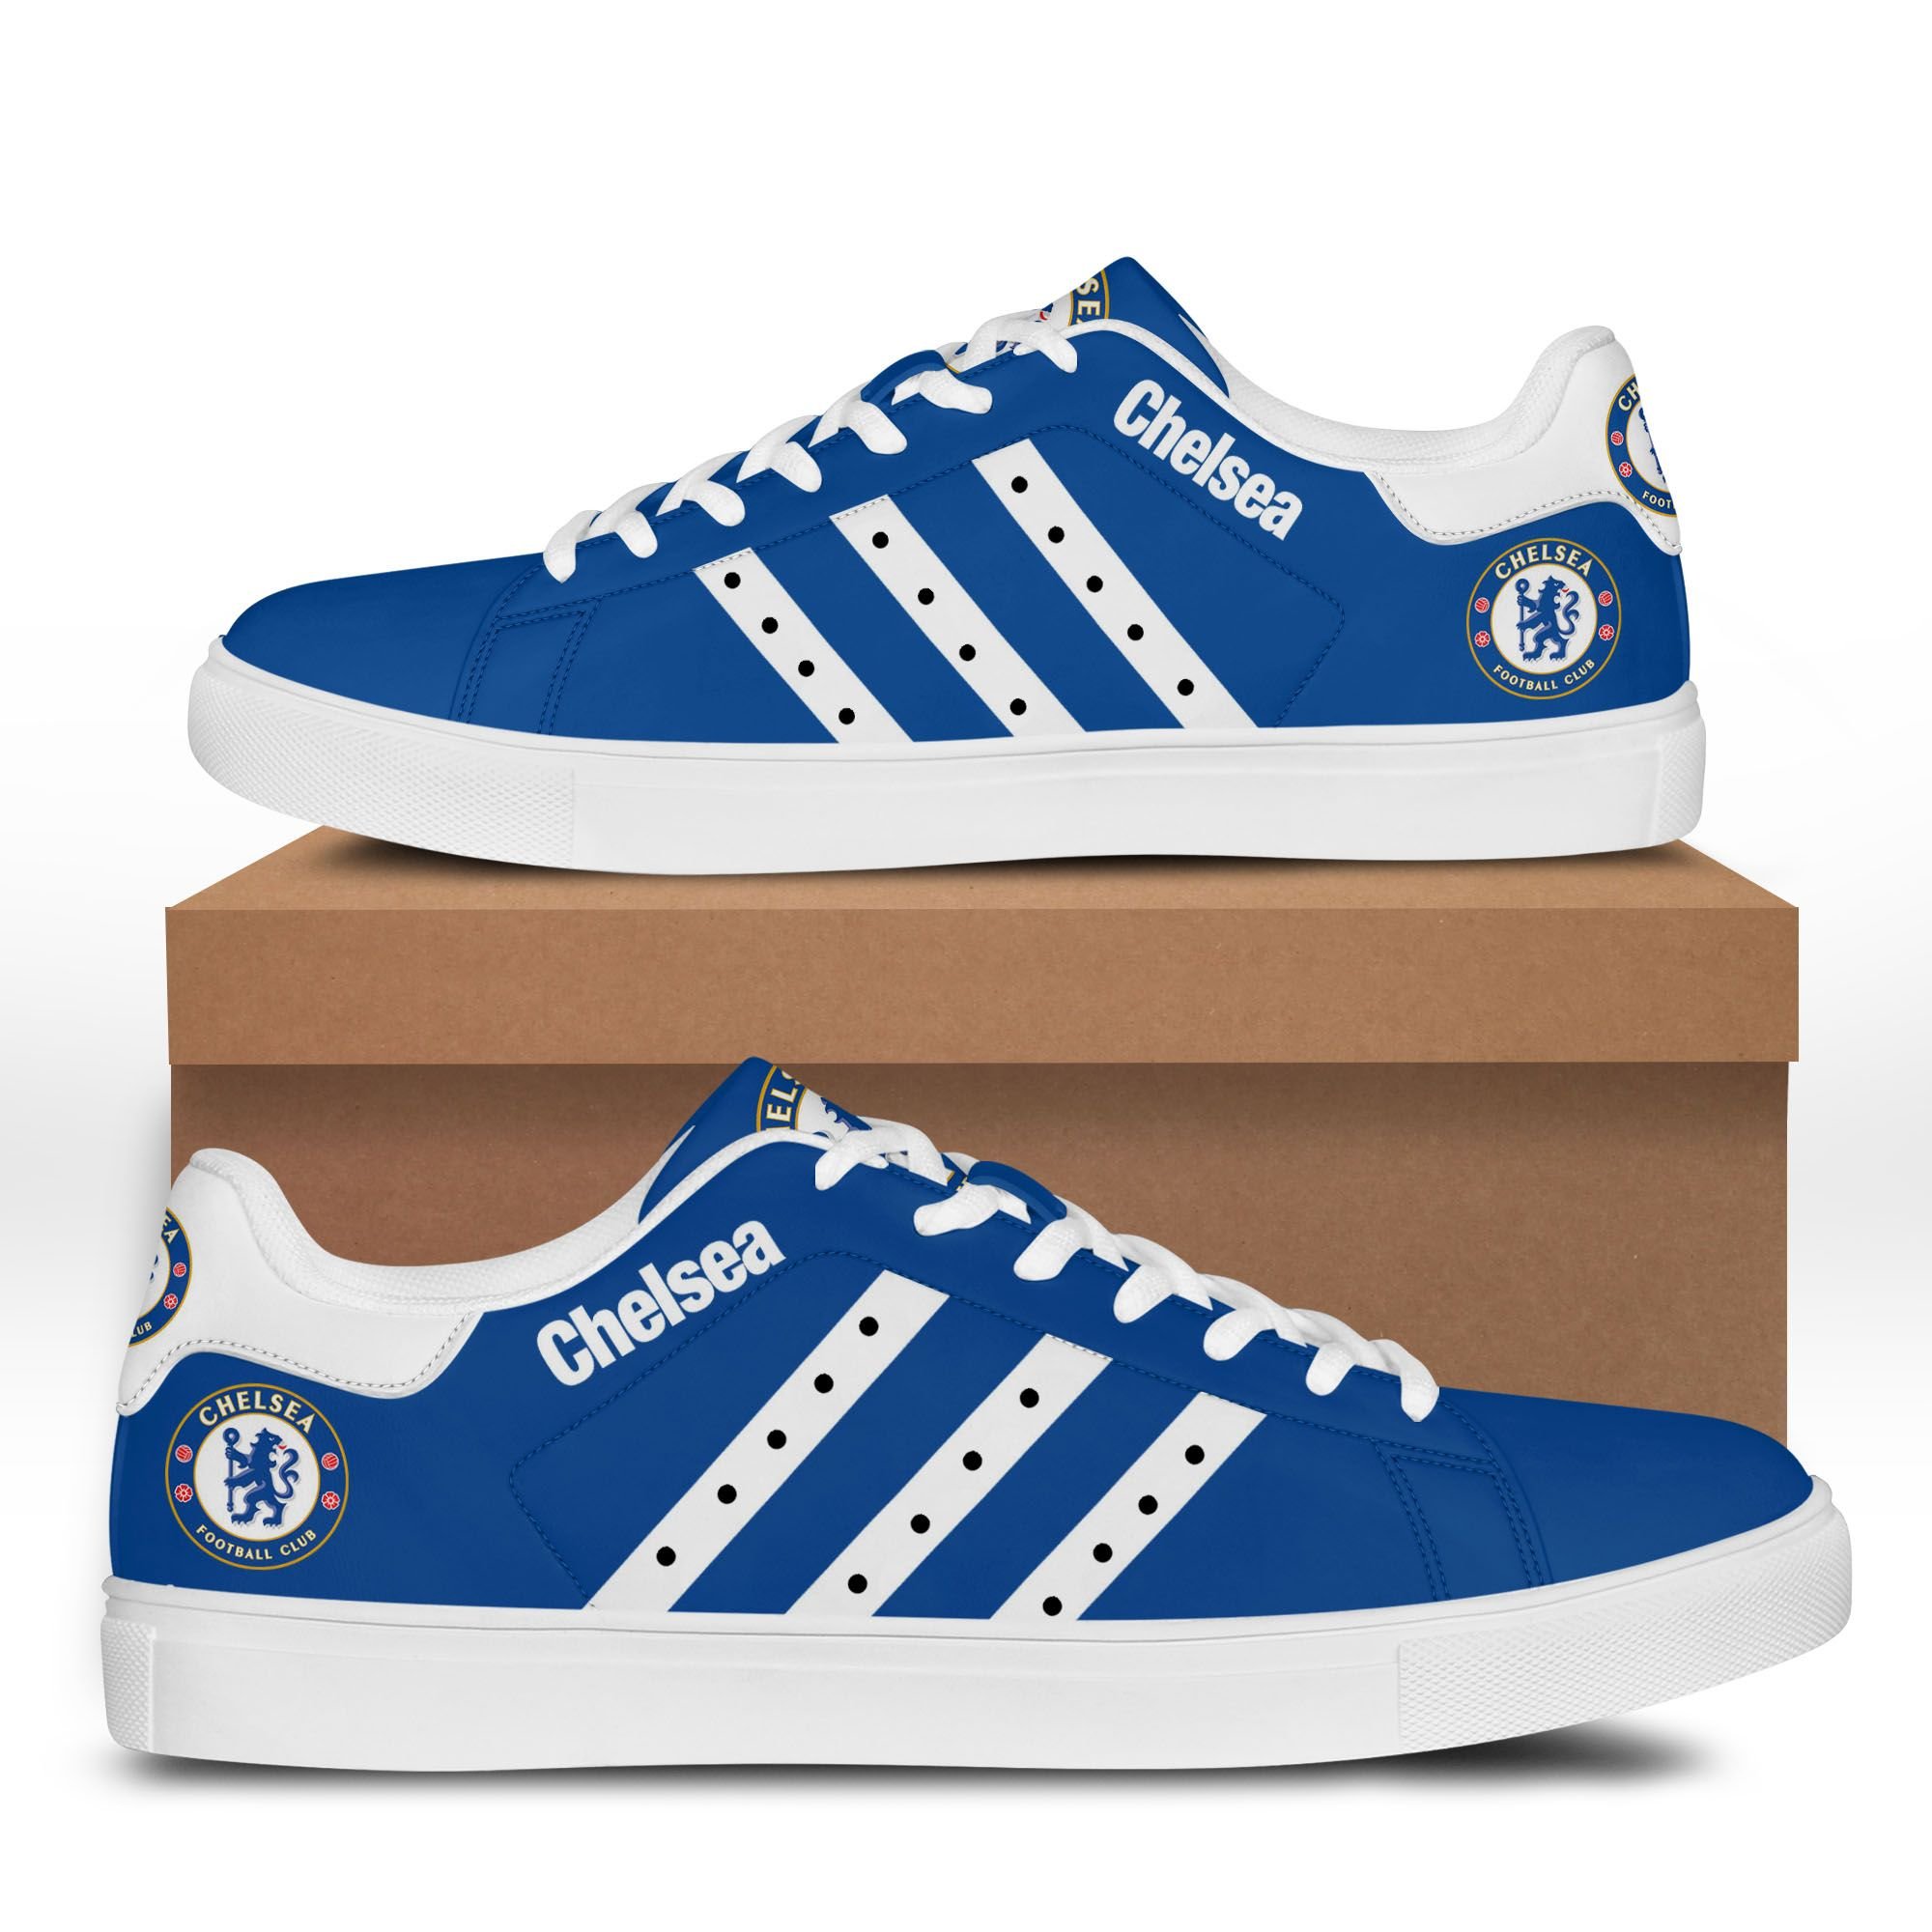 Chelsea stan smith shoes - Picture 2